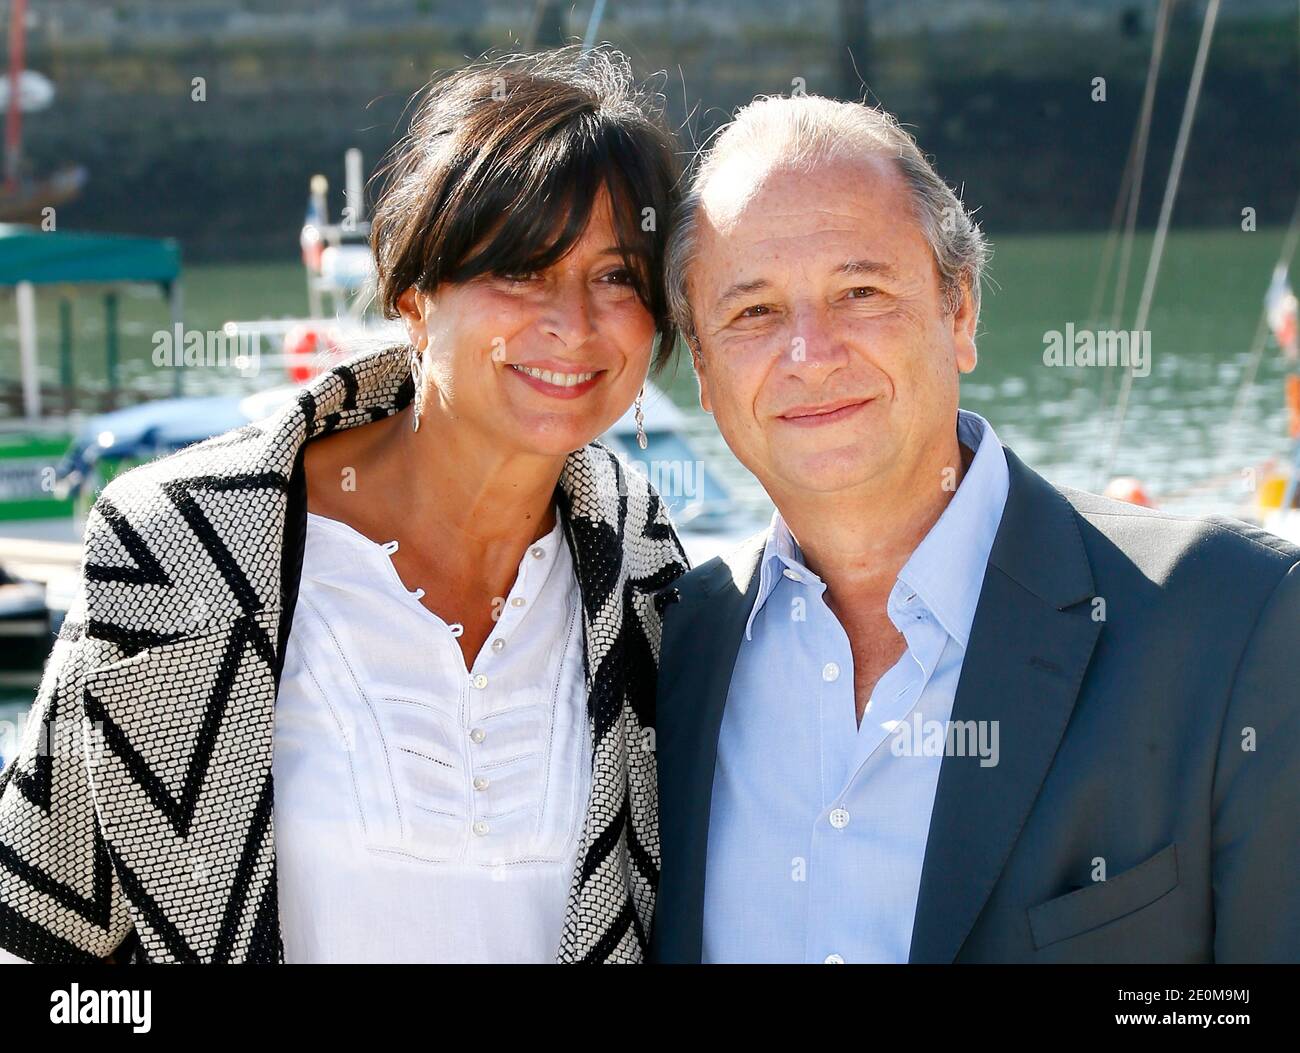 Patrick Braoude and his wife attending the 14th Festival of TV Fiction in La Rochelle, France, on September 14, 2012. Photo by Patrick Bernard/ABACAPRESS.COM Stock Photo